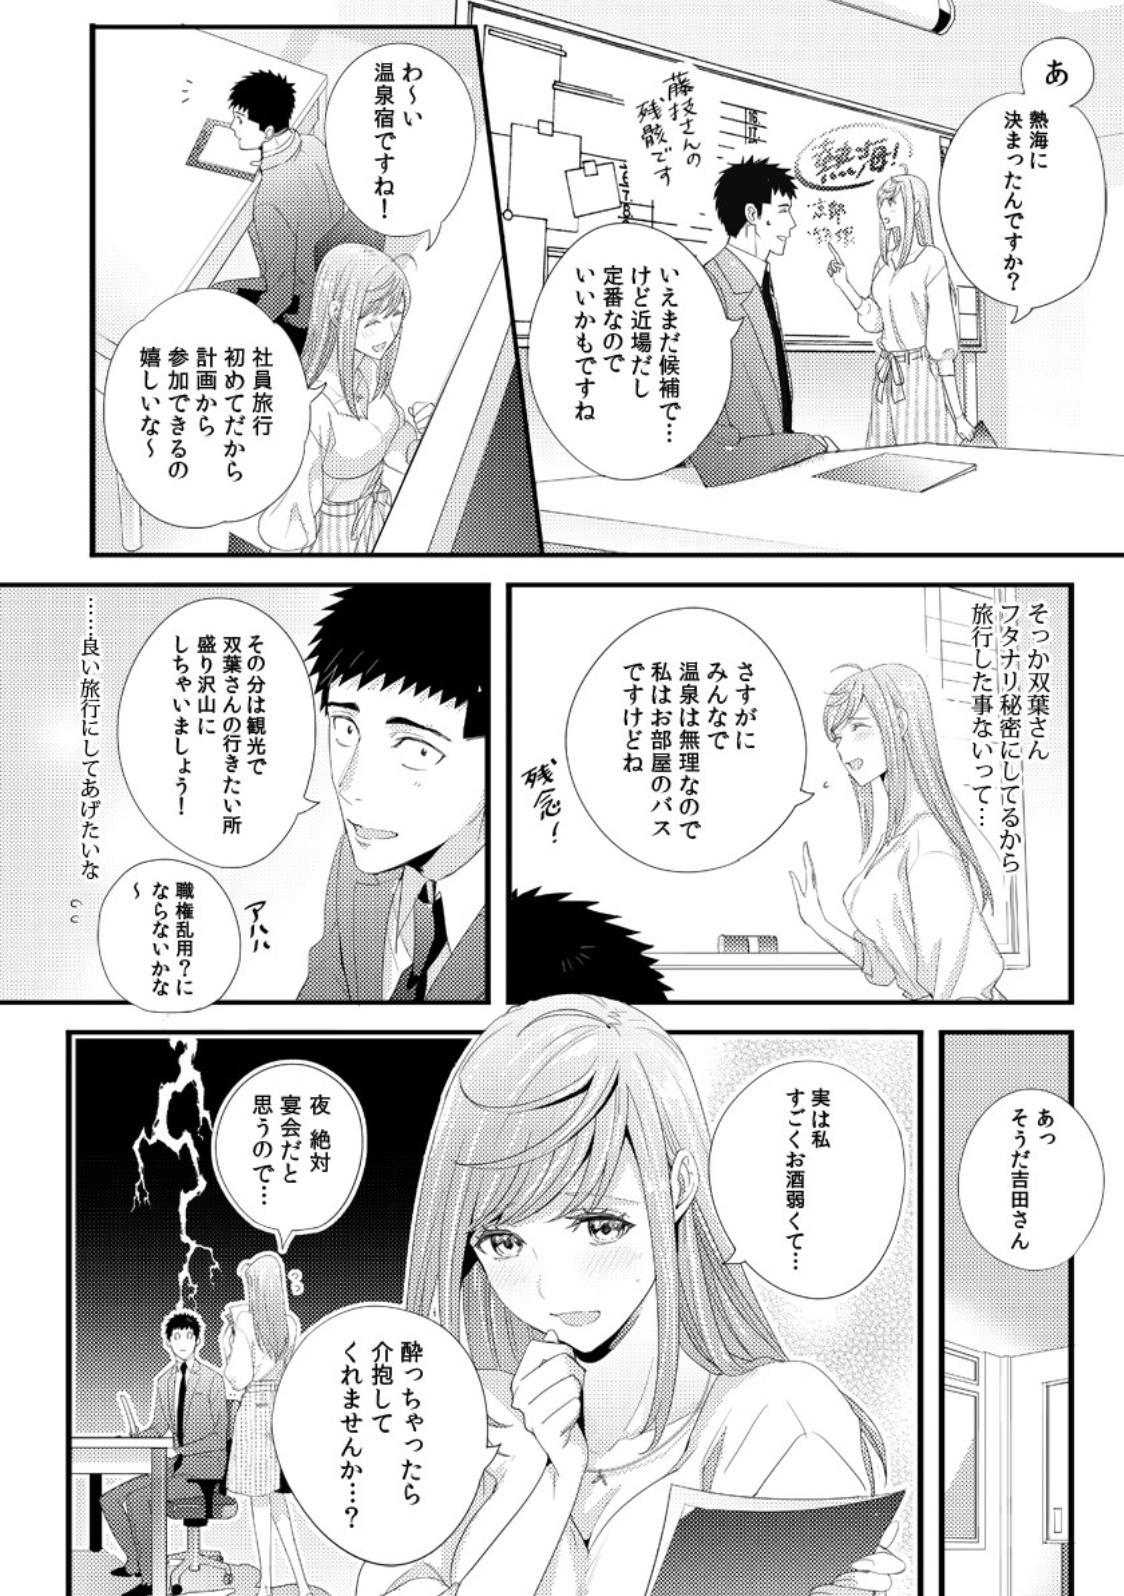 Please Let Me Hold You Futaba-San! Ch. 1-4 5